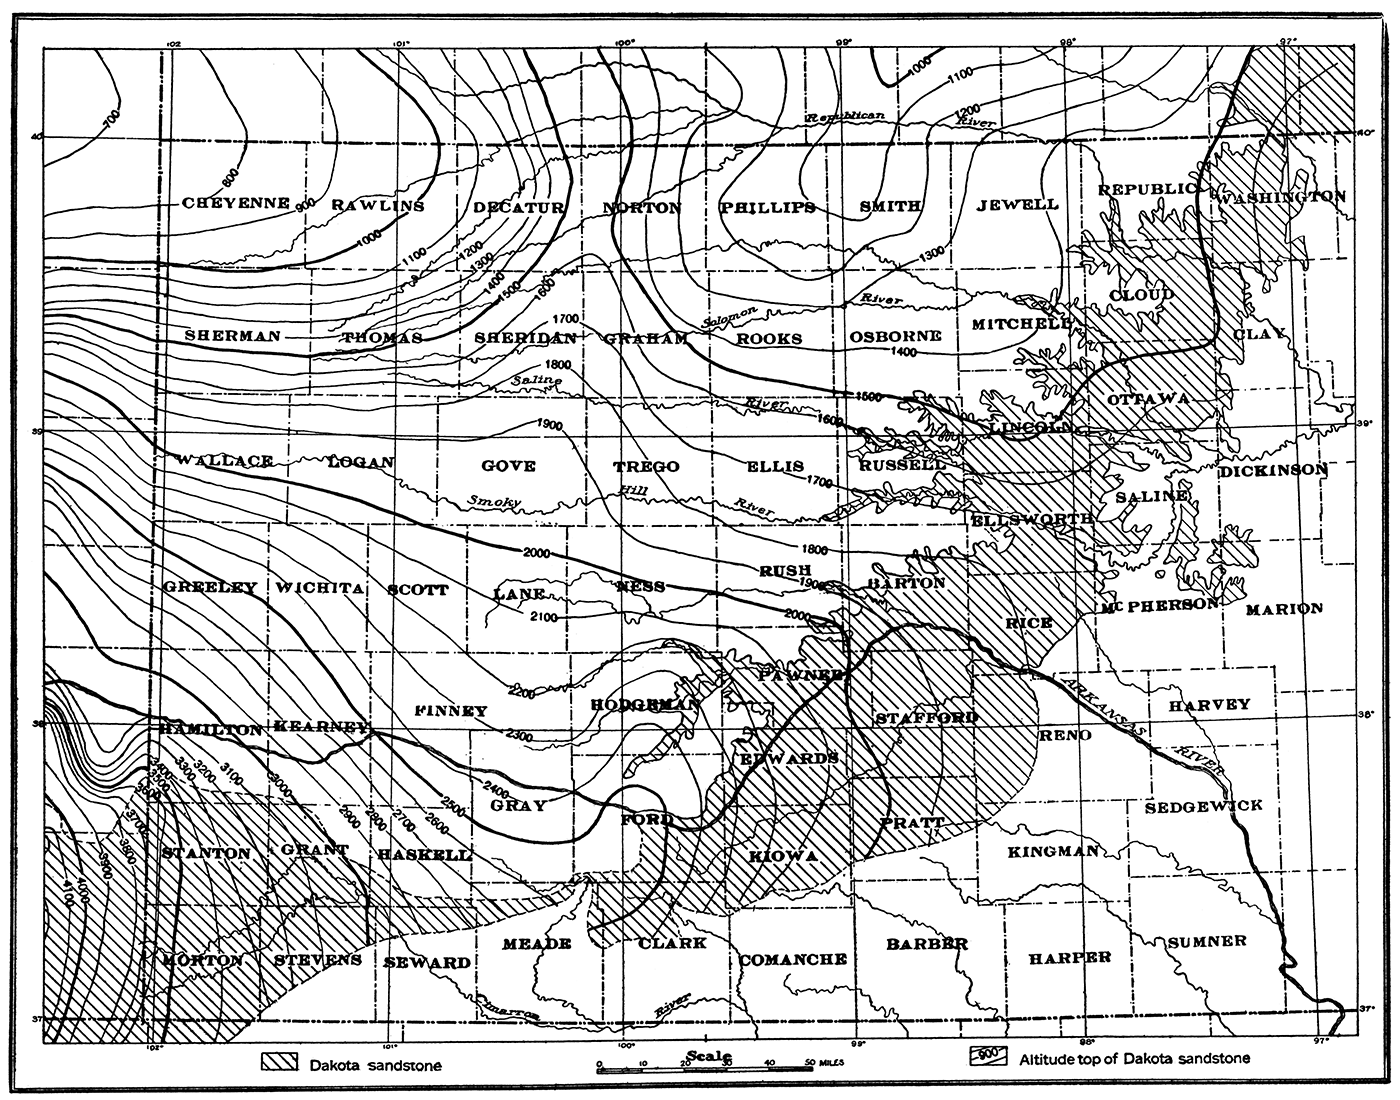 Structure map of western Kansas.